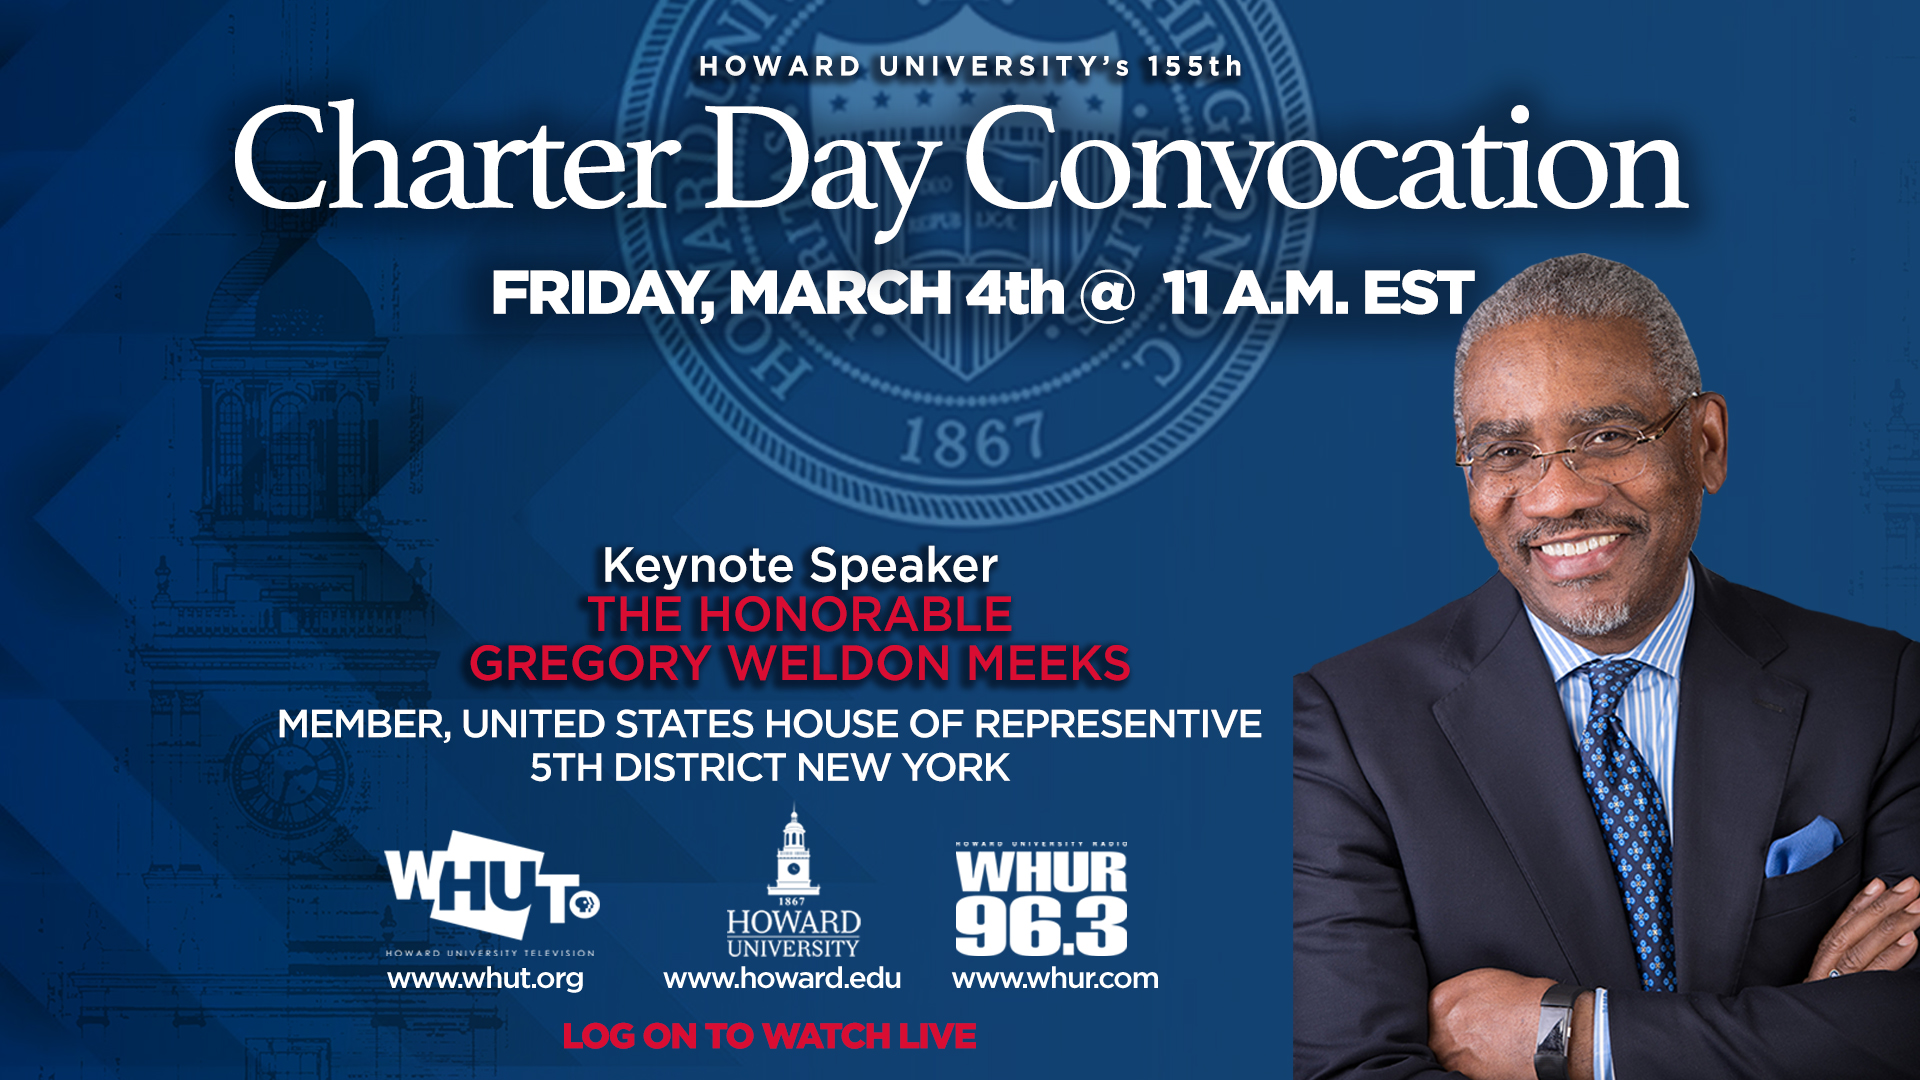 Charter Day Convocation: Friday, March 4th @ 11 A.M. Keynote speaker: the honorable Gregory Weldon Meeks, member, United States house of representatives 5th district New York